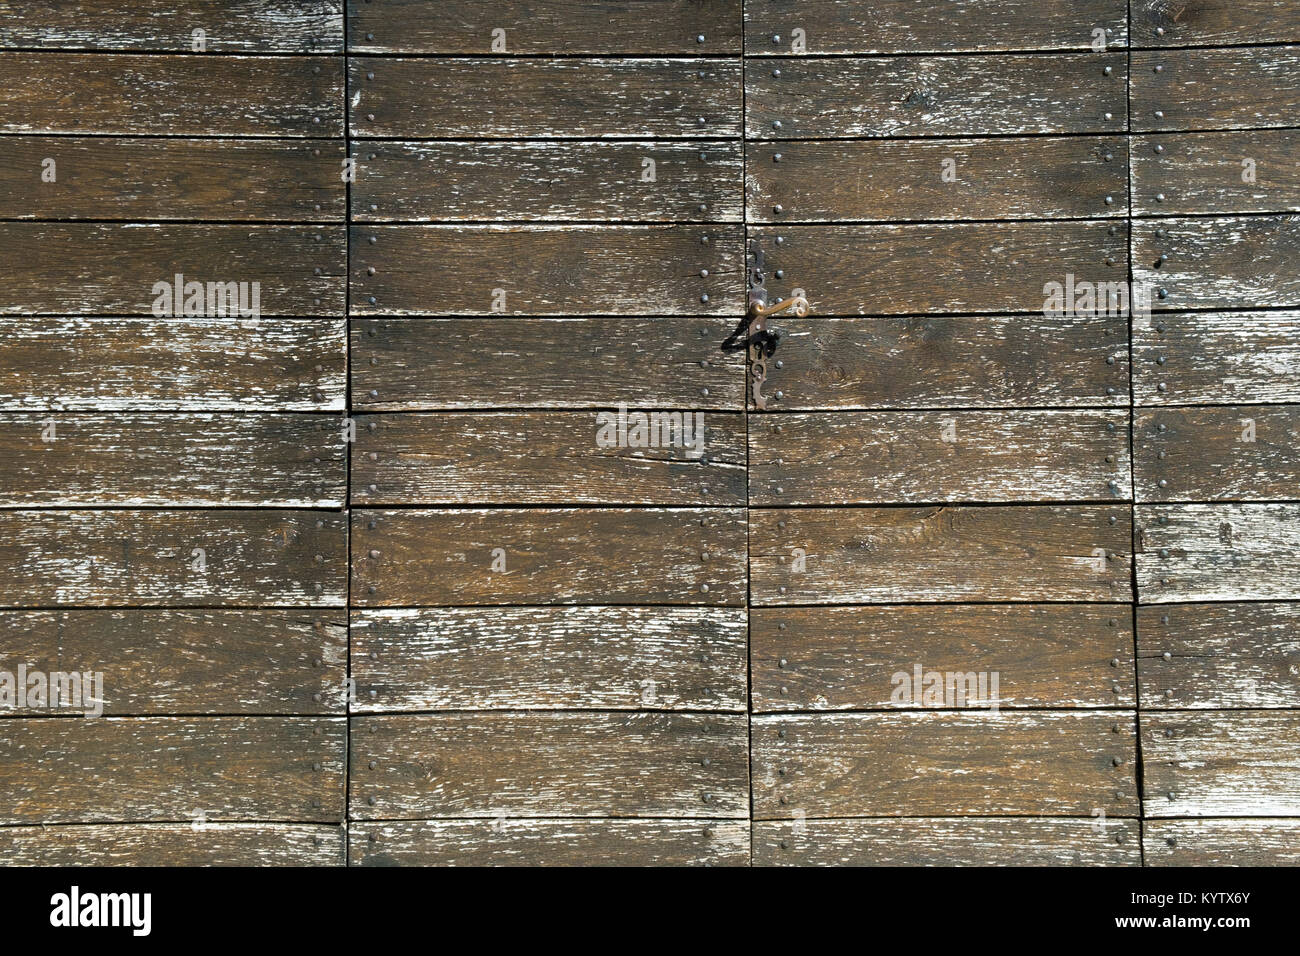 Full frame pattern of the planks of an unsual wooden door construction. Timber deteriorating due to breakdown of treatment coating. Stock Photo